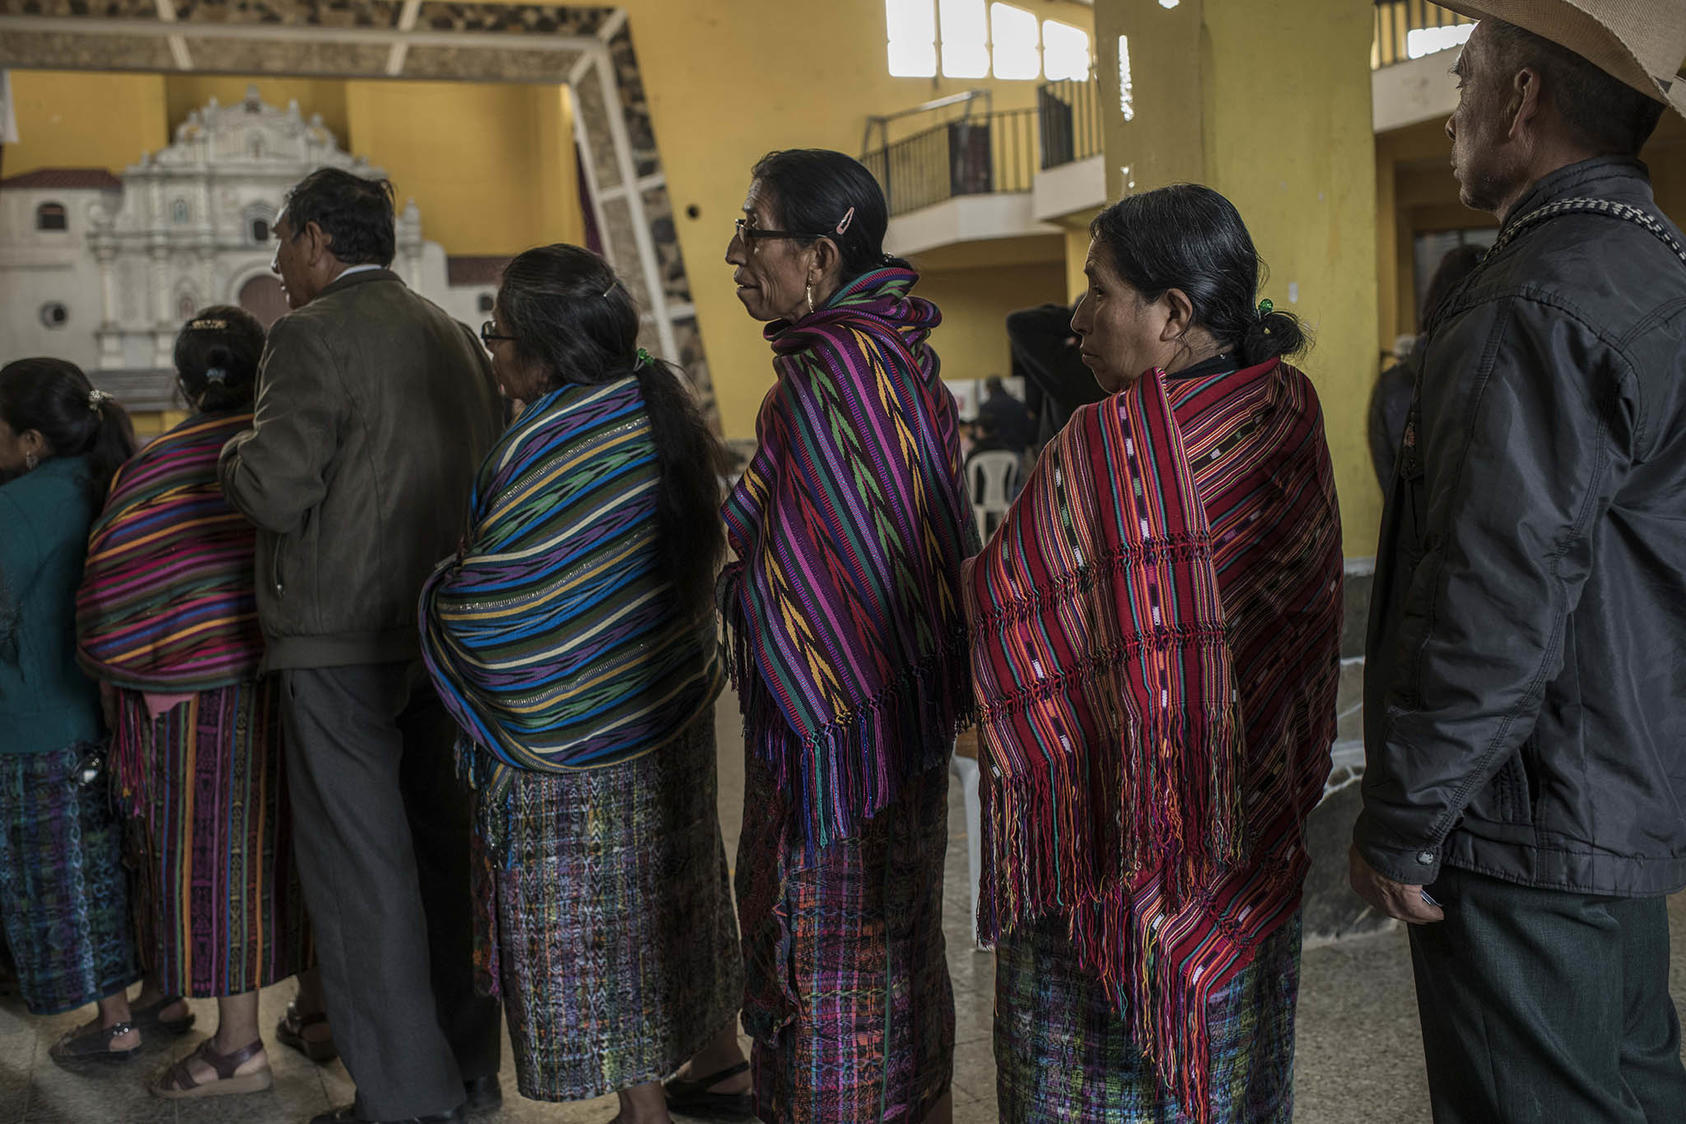 Voters queue for the first-round polls, Chimaltenango, Guatemala, June 25, 2023. The election in the Central American nation is marked by the exclusion of top candidates and other judicial interference. (Daniele Volpe/The New York Times)